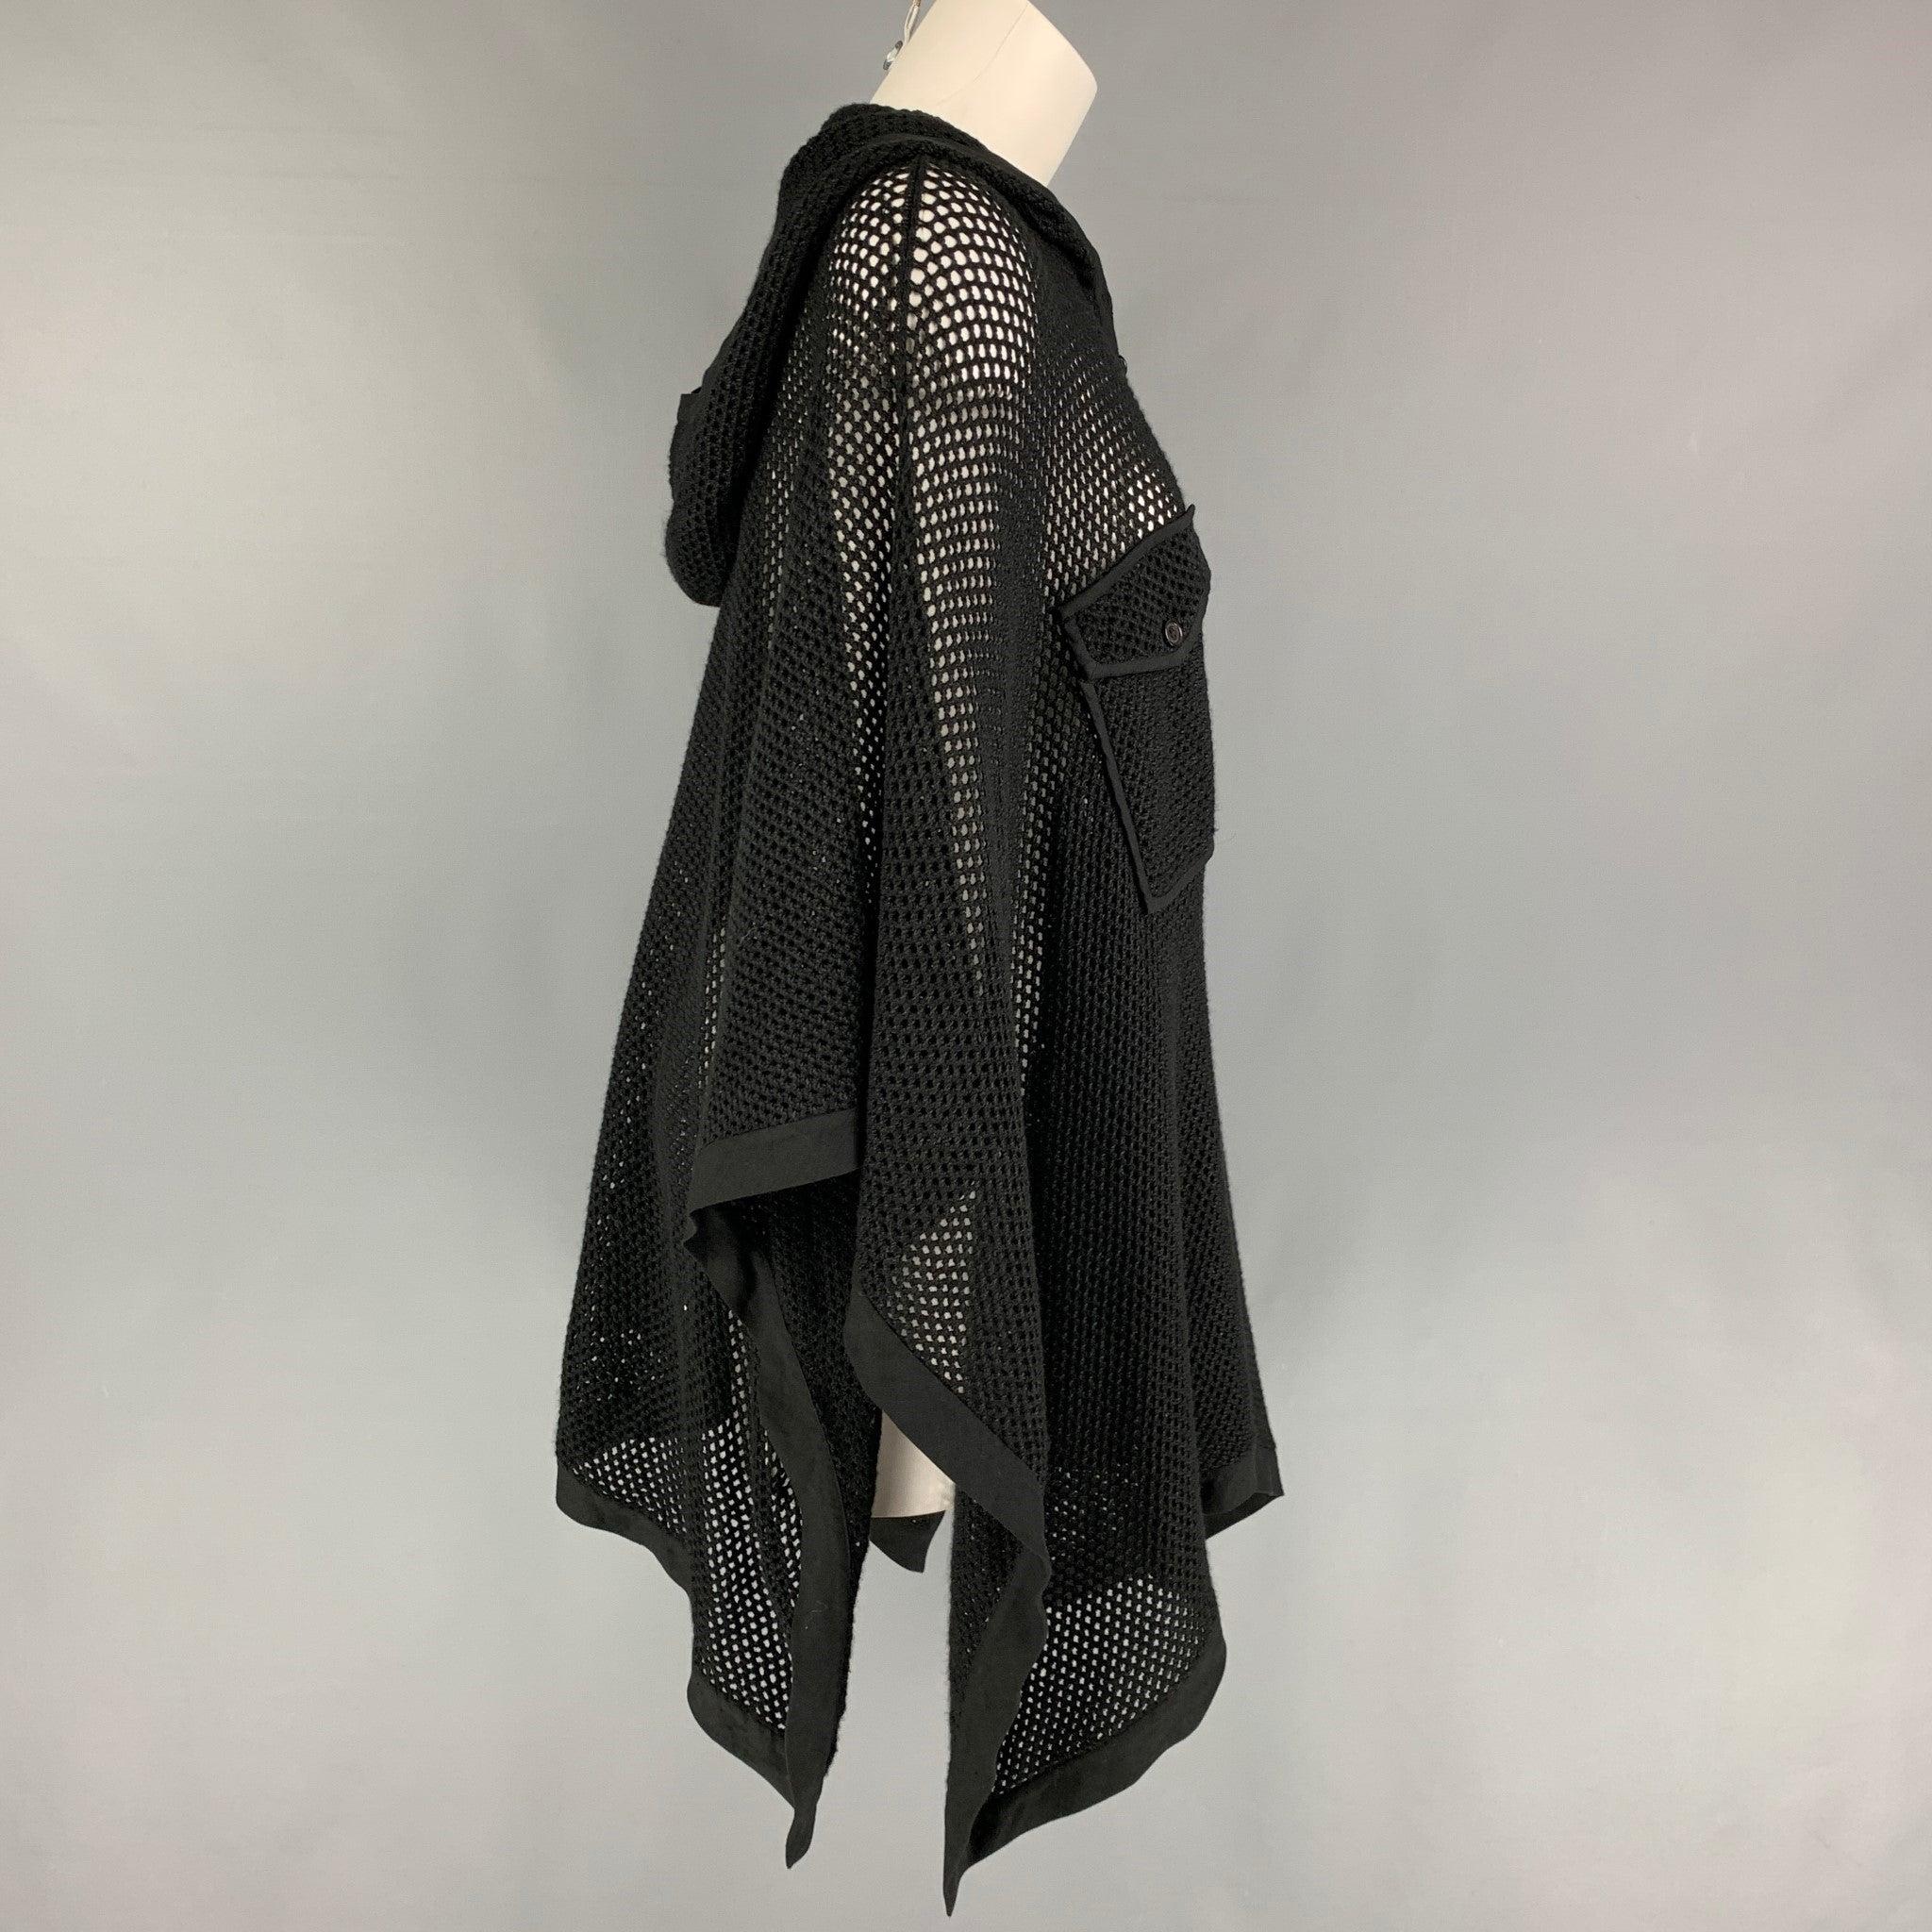 RALPH LAUREN Collection cape comes in a black mesh cotton featuring a poncho style, hooded, front pockets, and a half buttoned closure.
Very Good
Pre-Owned Condition. 

Marked:   M-L 

Measurements: 
  Length: 30 inches 
  
  
 
Reference: